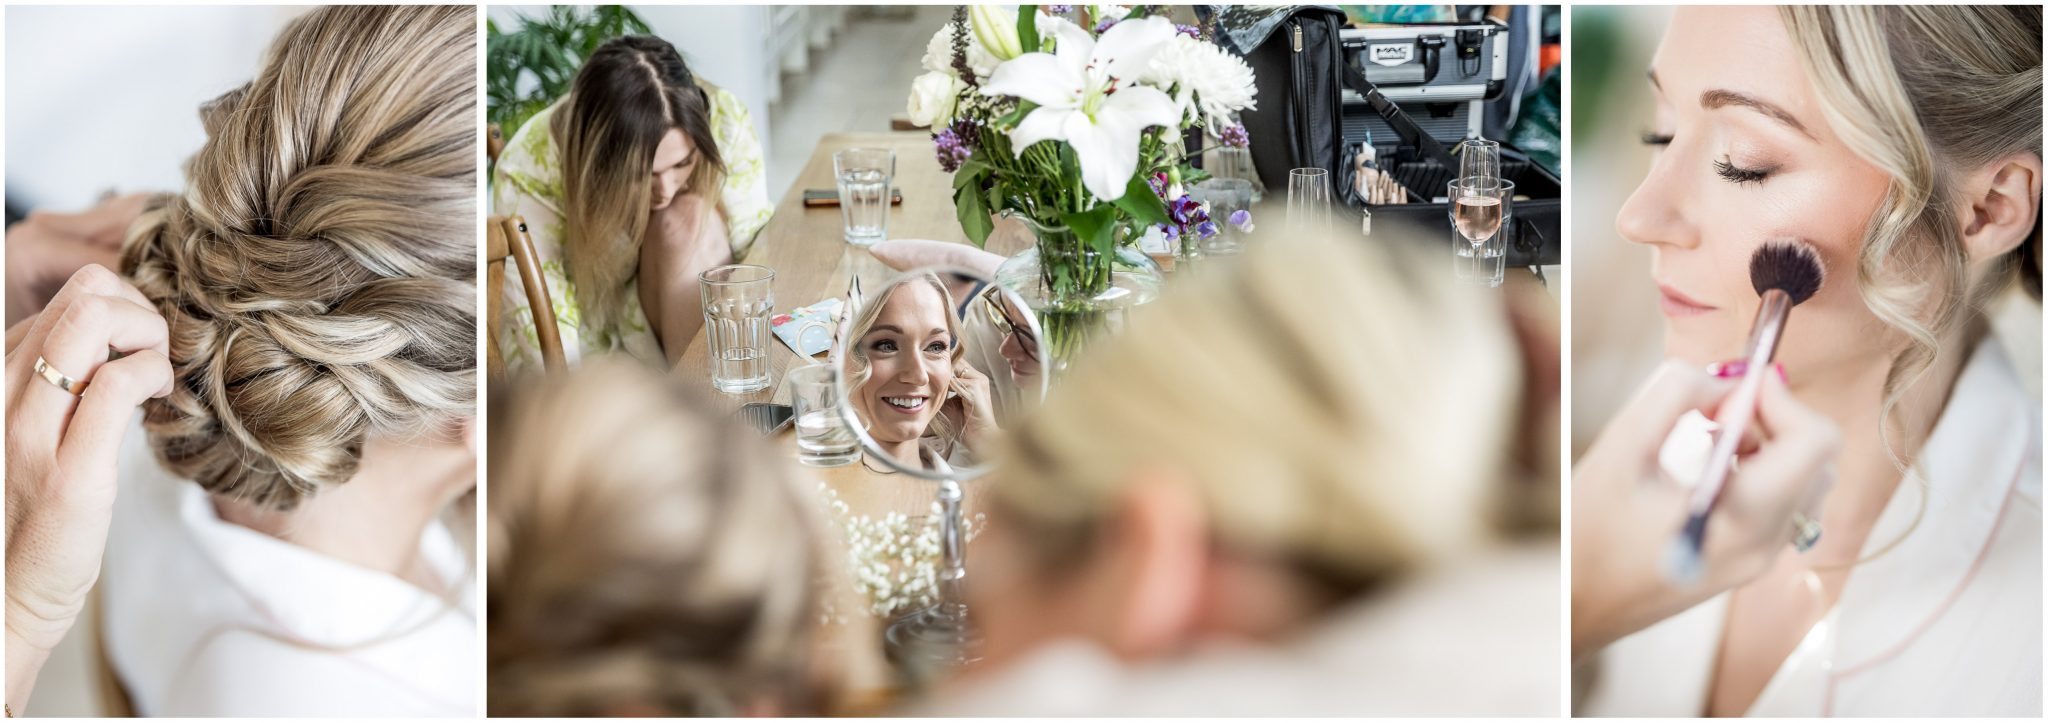 Bride hair and make up detail photography